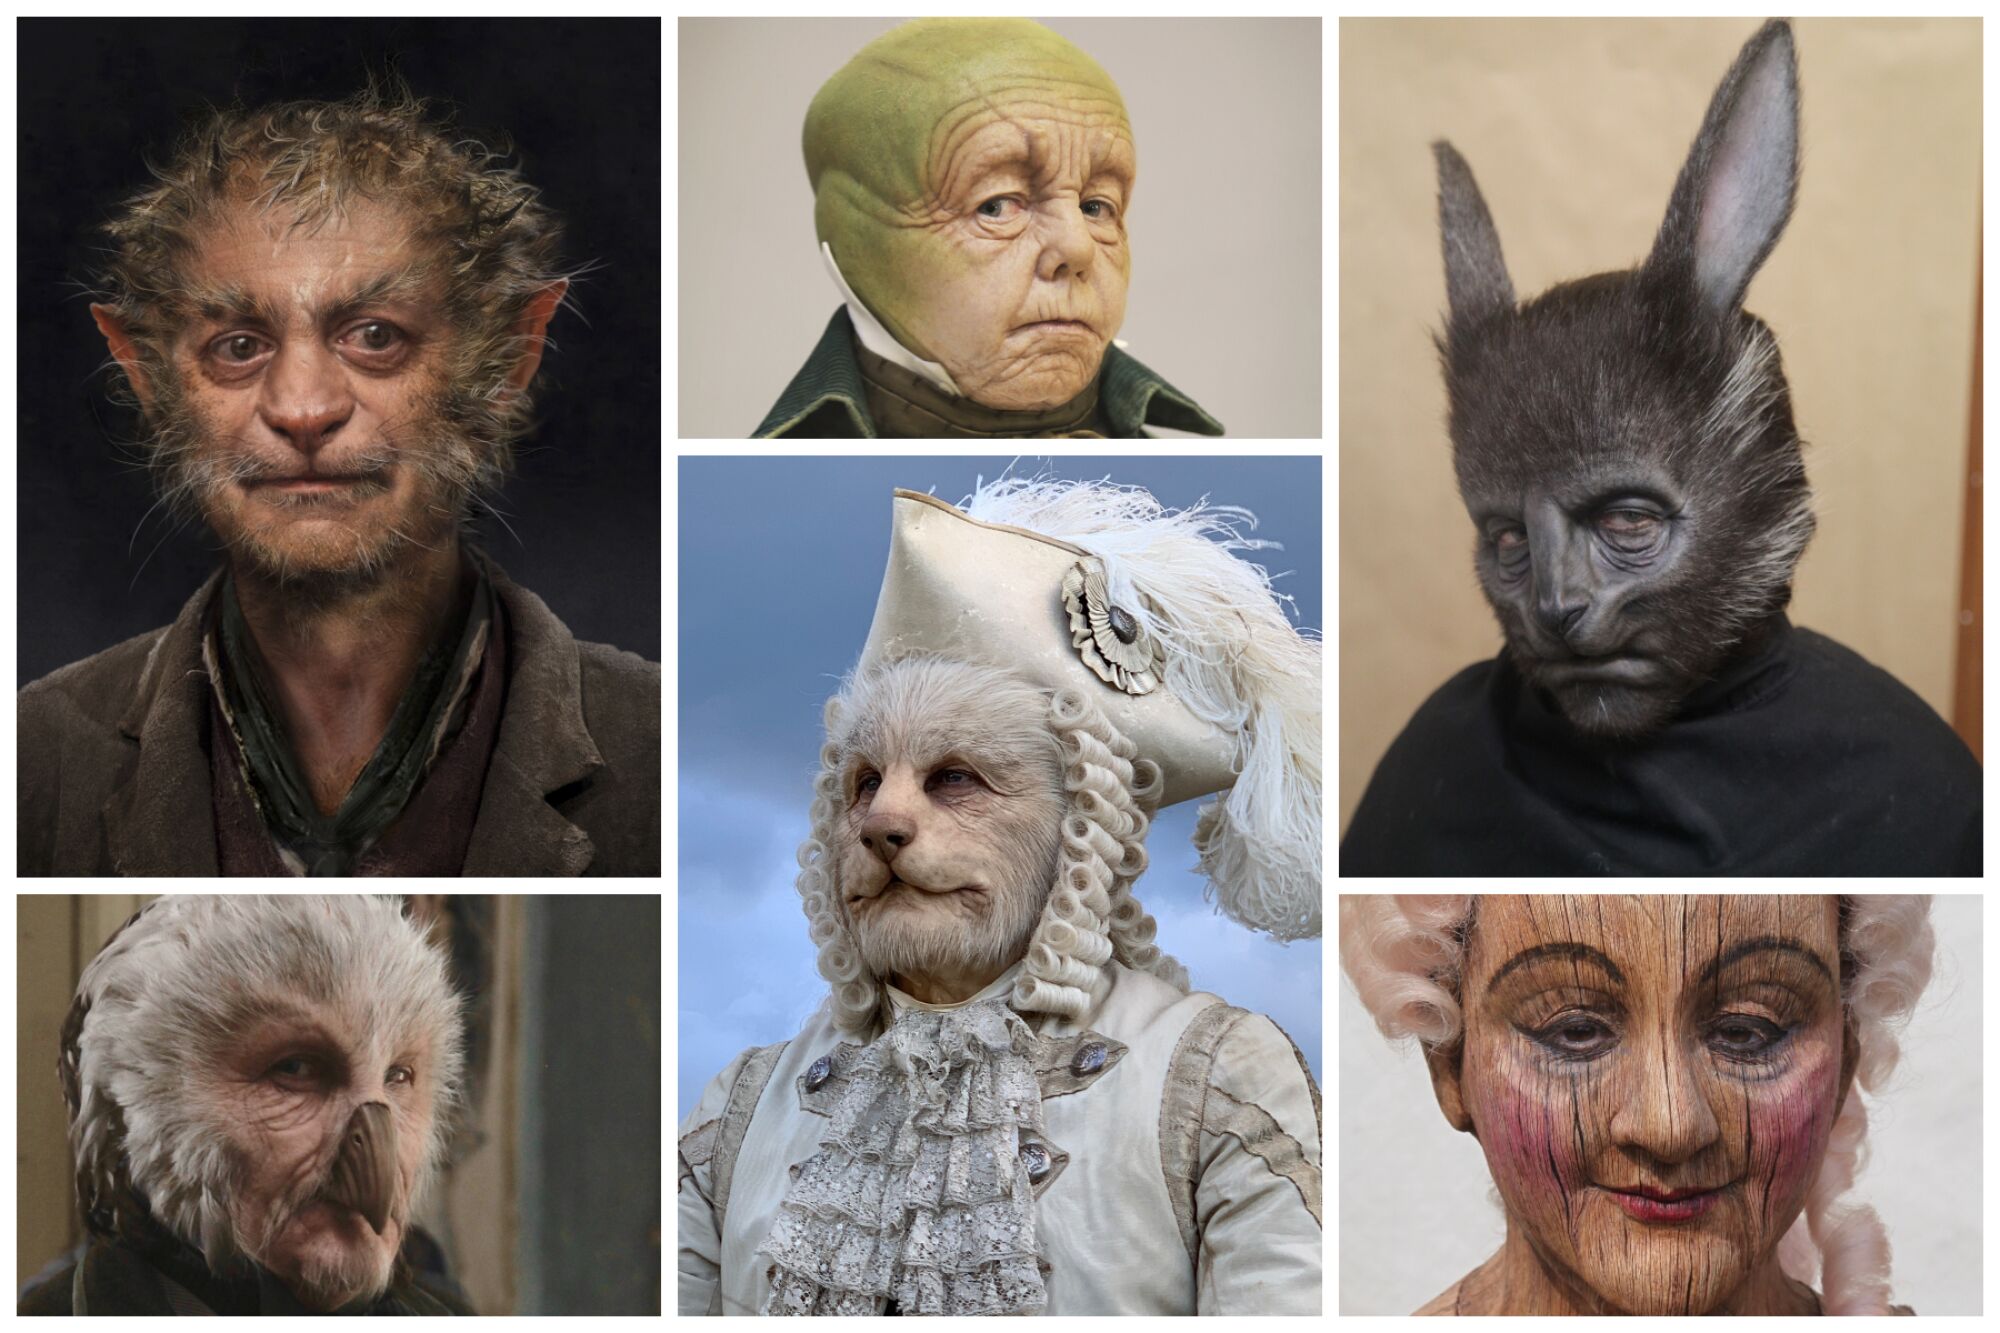 Some of the characters in “Pinocchio” created by prosthetic makeup designer Mark Coulier